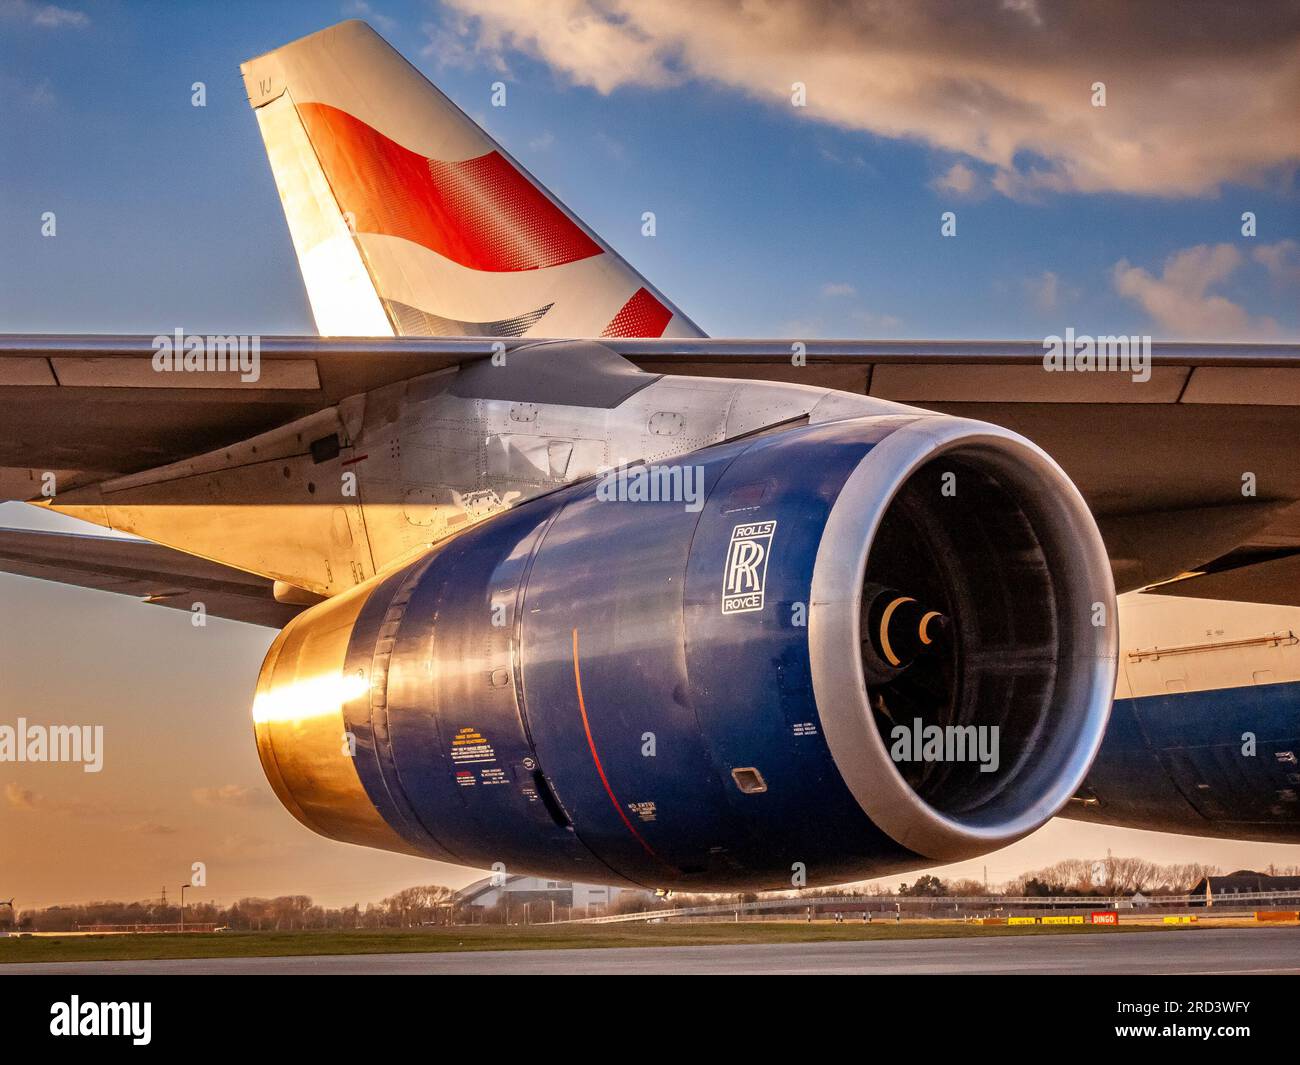 Late afternoon sunshine glinting off a Rolls Royce RB211 jet engine powering a British Airways Boeing 747-400 G-CIVJ  at London Heathrow Airport, UK Stock Photo